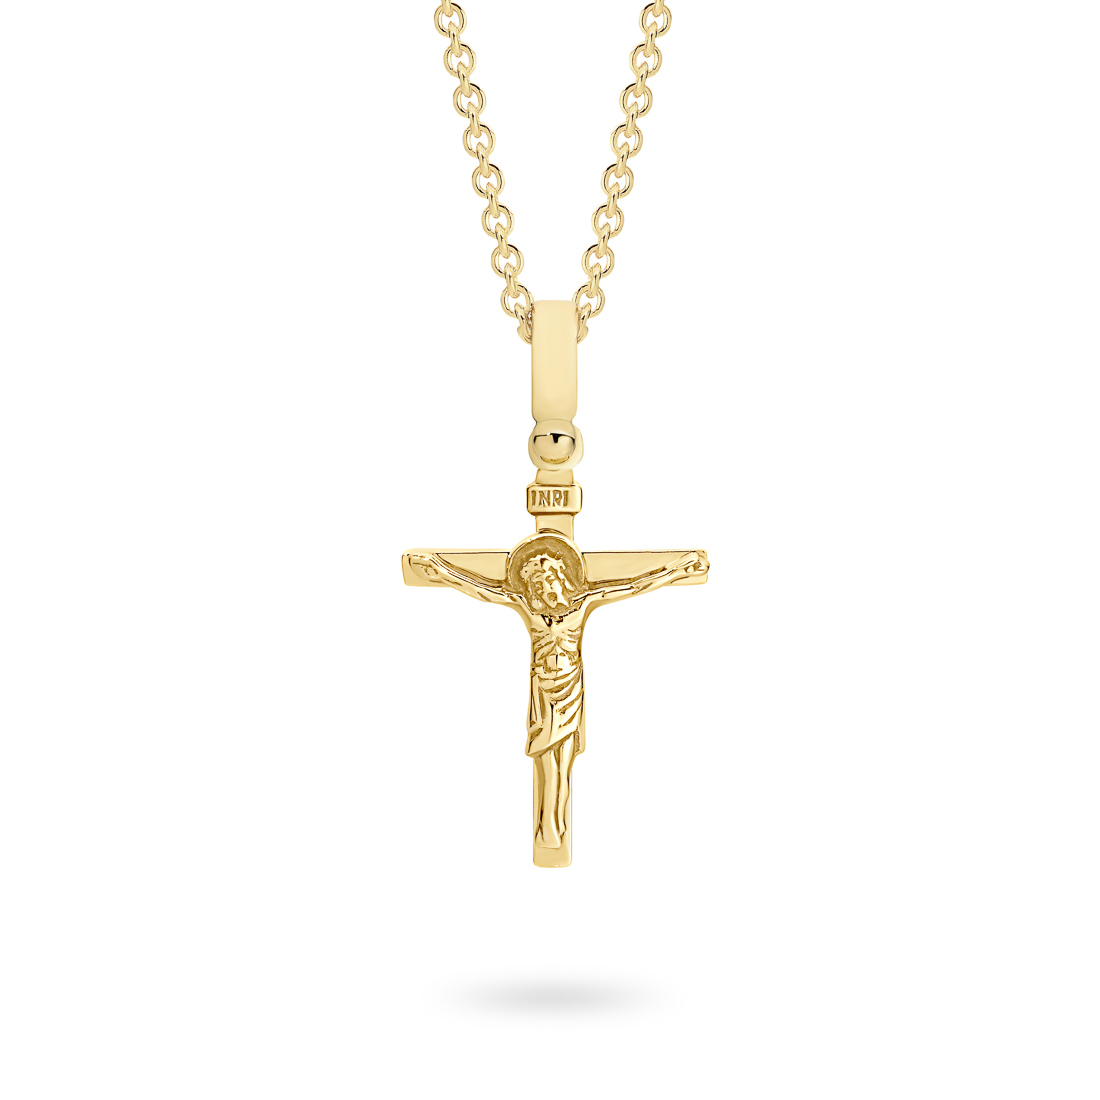 18K Yellow Gold Polished Crucifix Pendant With INRI Plate